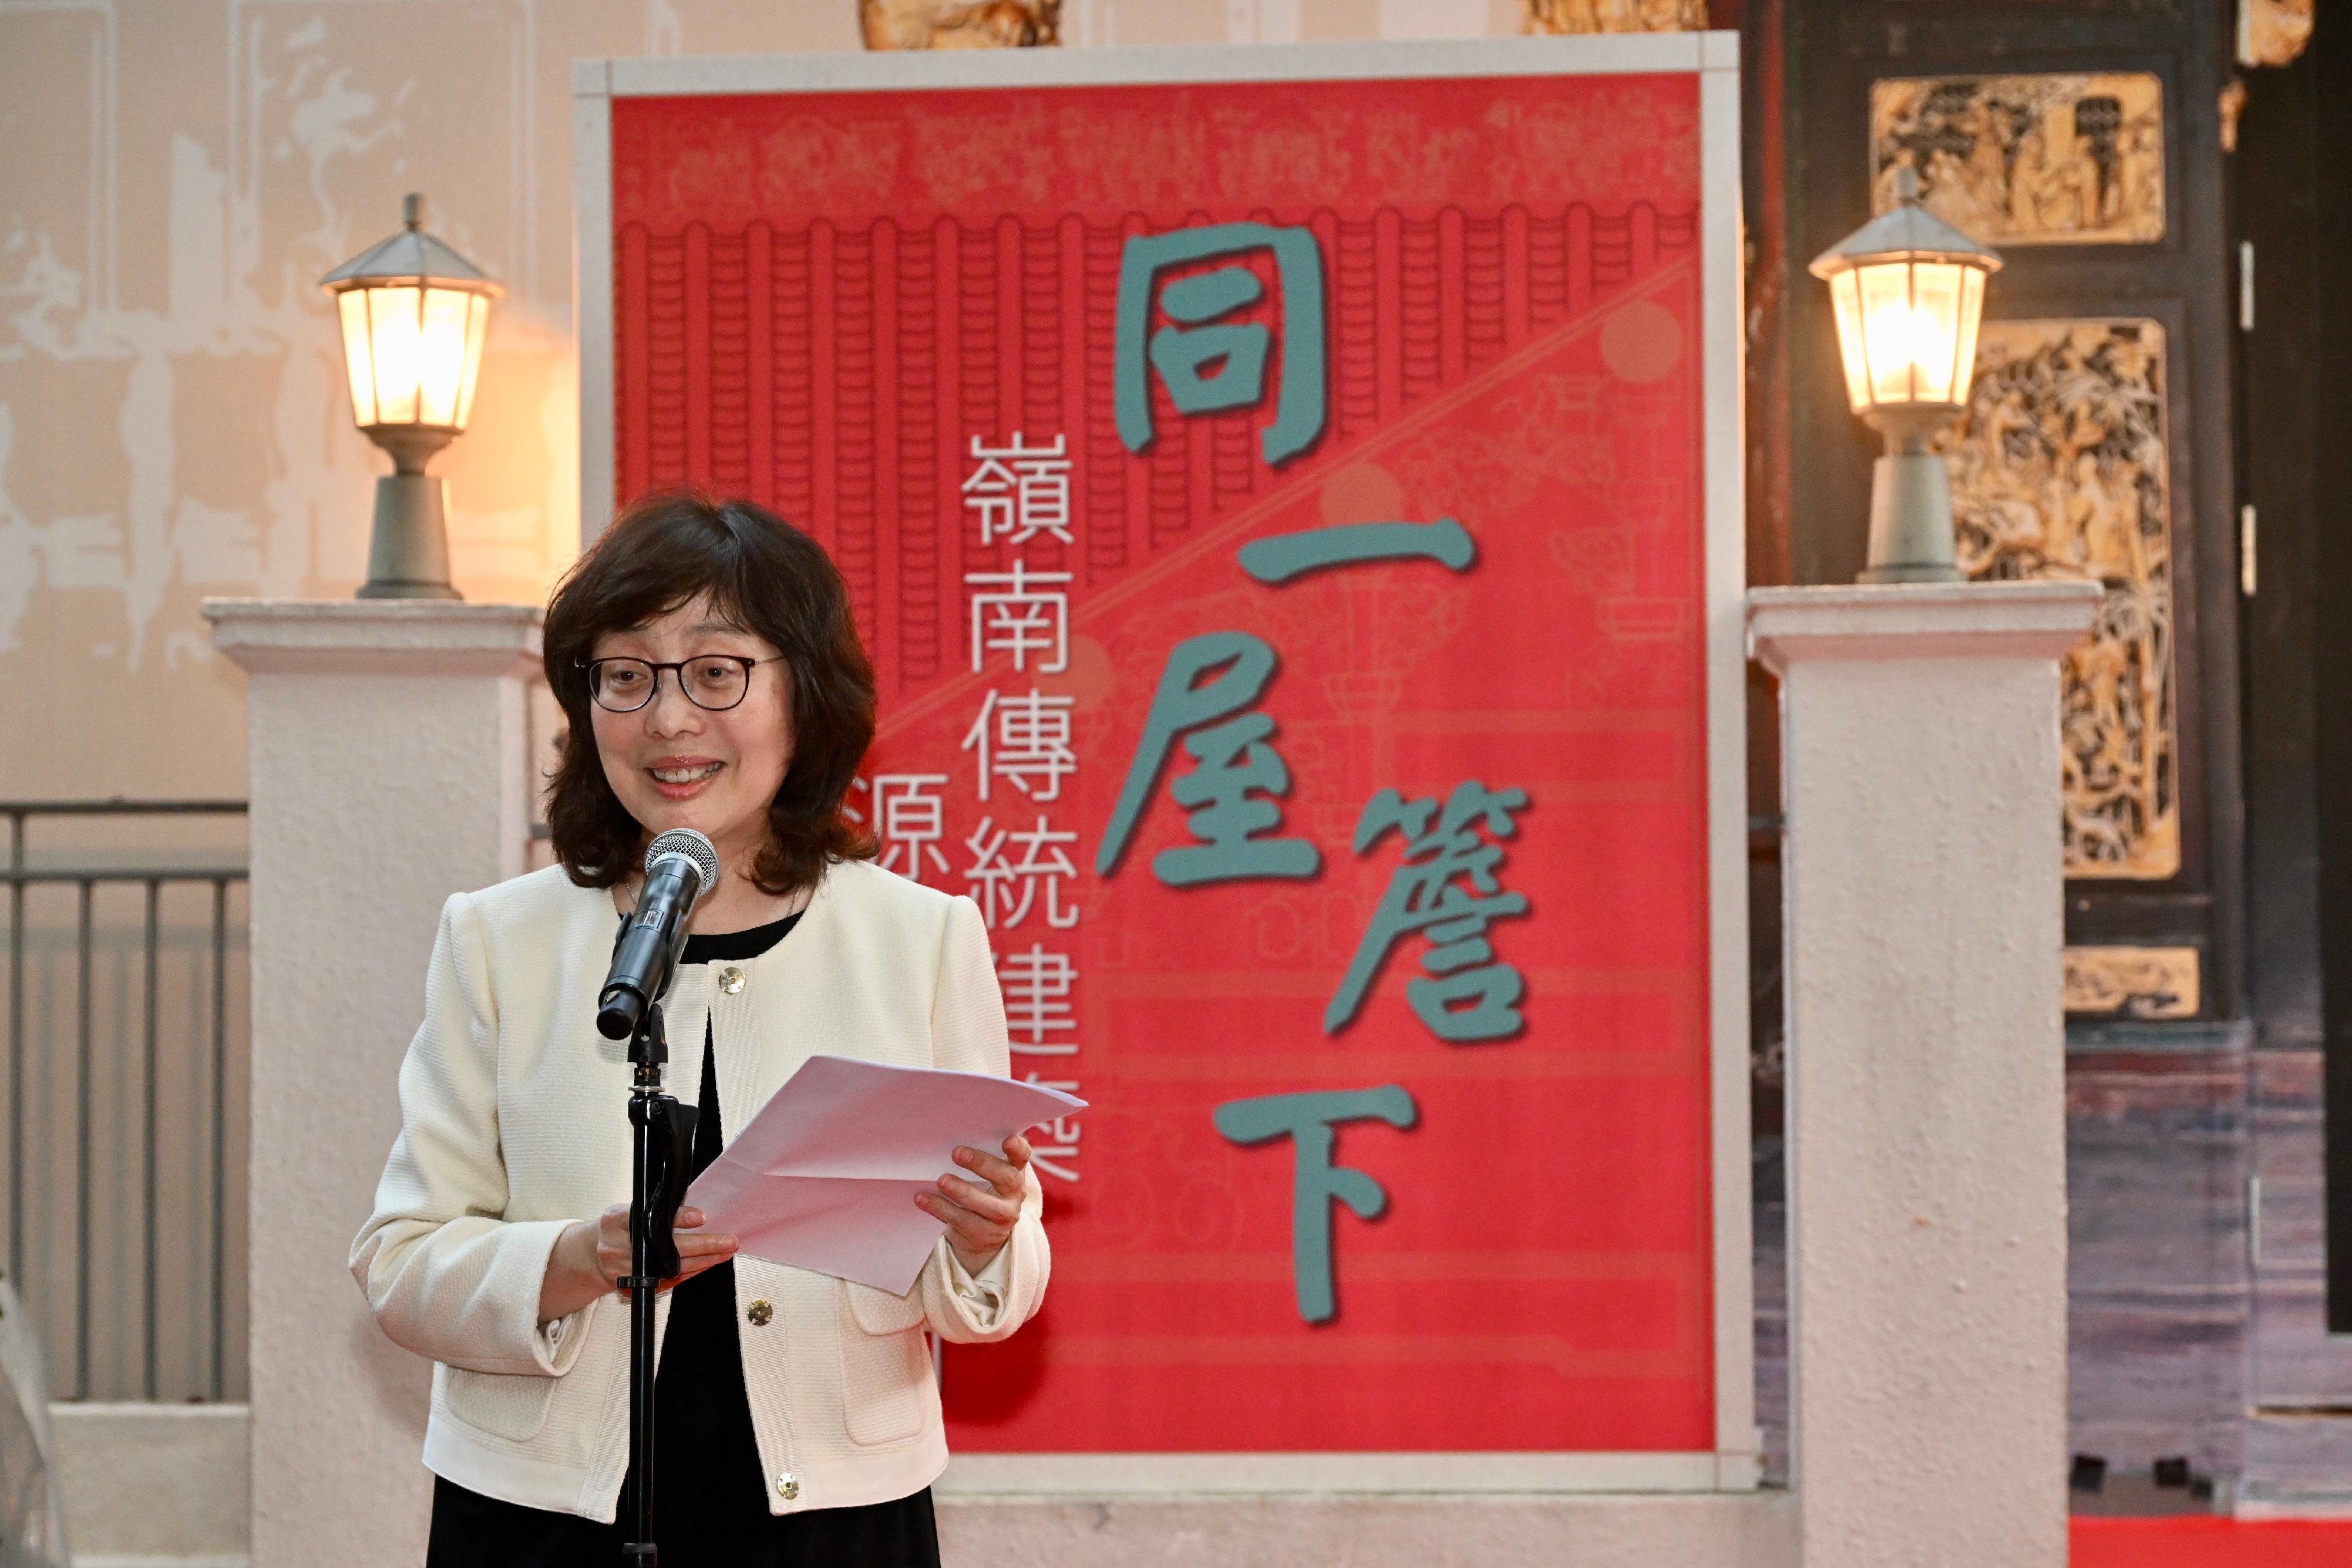 The "Under the Same Roof: Origin and Art of Lingnan Traditional Architecture" exhibition officially opened today (December 12). Photo shows the Secretary for Development, Ms Bernadette Linn, giving a speech at the opening ceremony.